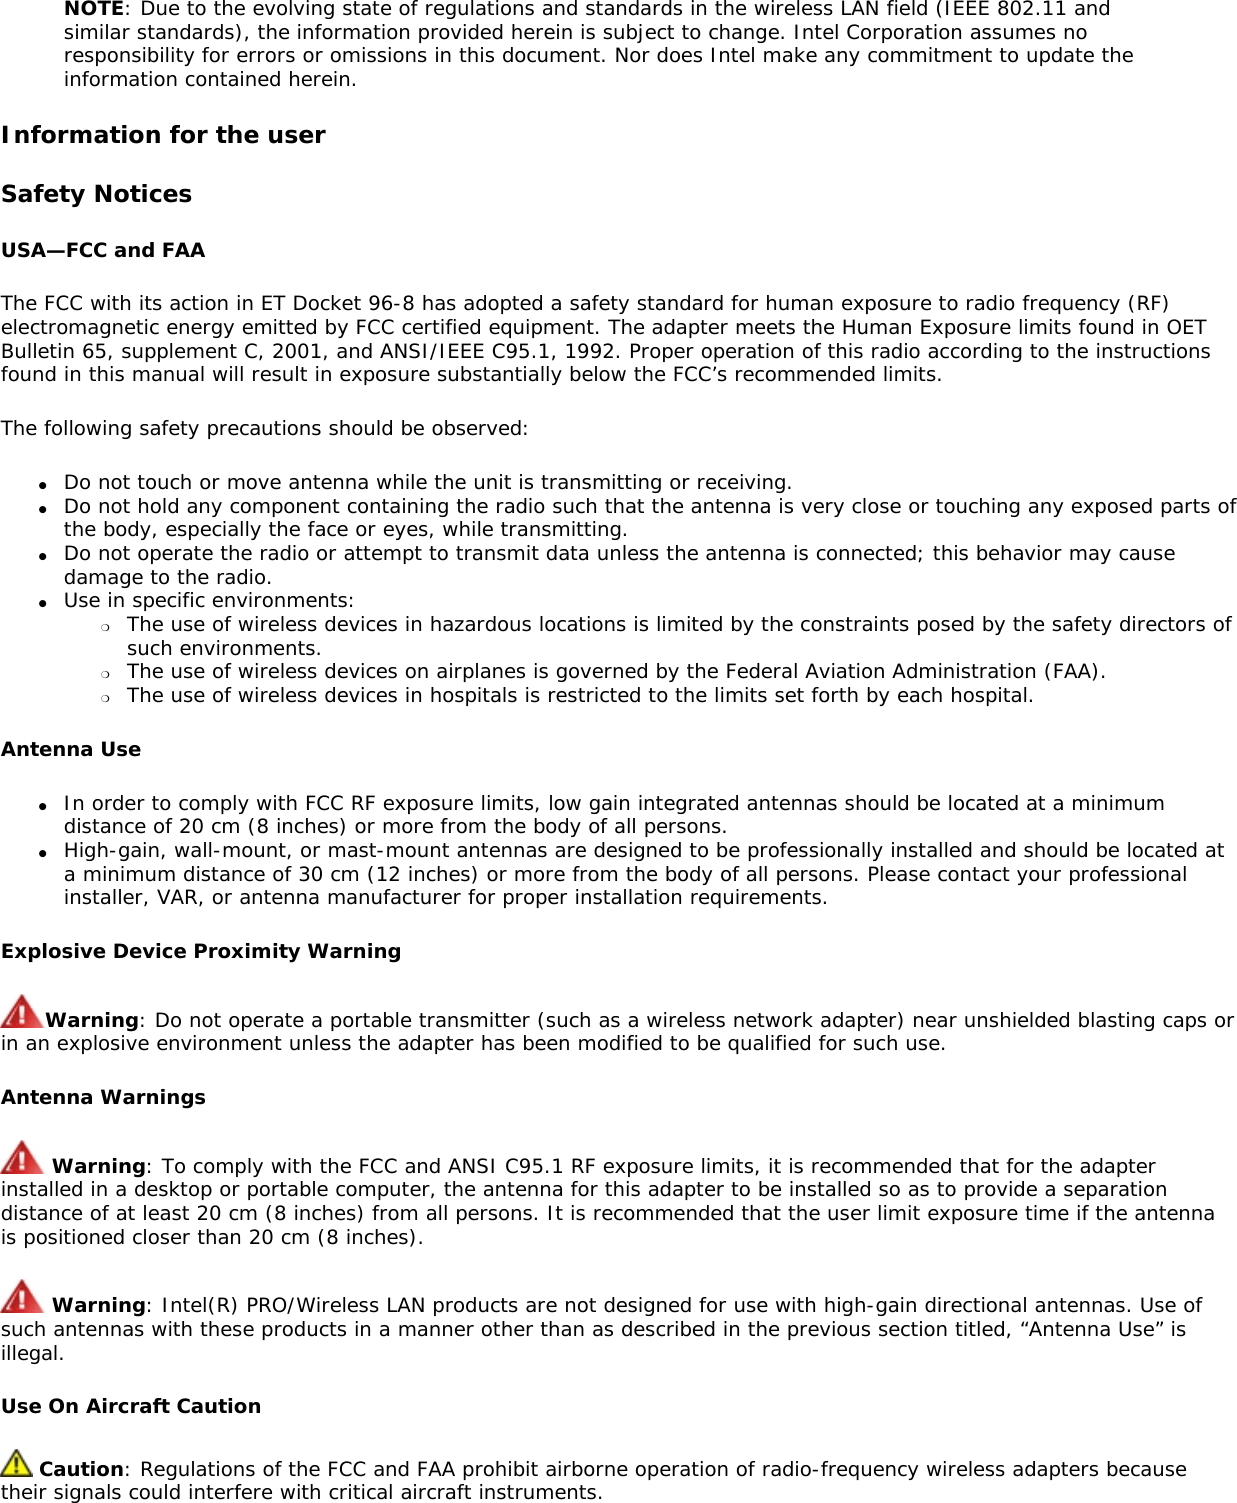 NOTE: Due to the evolving state of regulations and standards in the wireless LAN field (IEEE 802.11 and similar standards), the information provided herein is subject to change. Intel Corporation assumes no responsibility for errors or omissions in this document. Nor does Intel make any commitment to update the information contained herein.Information for the userSafety NoticesUSA—FCC and FAAThe FCC with its action in ET Docket 96-8 has adopted a safety standard for human exposure to radio frequency (RF) electromagnetic energy emitted by FCC certified equipment. The adapter meets the Human Exposure limits found in OET Bulletin 65, supplement C, 2001, and ANSI/IEEE C95.1, 1992. Proper operation of this radio according to the instructions found in this manual will result in exposure substantially below the FCC’s recommended limits.The following safety precautions should be observed:●     Do not touch or move antenna while the unit is transmitting or receiving.●     Do not hold any component containing the radio such that the antenna is very close or touching any exposed parts of the body, especially the face or eyes, while transmitting.●     Do not operate the radio or attempt to transmit data unless the antenna is connected; this behavior may cause damage to the radio.●     Use in specific environments: ❍     The use of wireless devices in hazardous locations is limited by the constraints posed by the safety directors of such environments.❍     The use of wireless devices on airplanes is governed by the Federal Aviation Administration (FAA).❍     The use of wireless devices in hospitals is restricted to the limits set forth by each hospital.Antenna Use●     In order to comply with FCC RF exposure limits, low gain integrated antennas should be located at a minimum distance of 20 cm (8 inches) or more from the body of all persons.●     High-gain, wall-mount, or mast-mount antennas are designed to be professionally installed and should be located at a minimum distance of 30 cm (12 inches) or more from the body of all persons. Please contact your professional installer, VAR, or antenna manufacturer for proper installation requirements.Explosive Device Proximity WarningWarning: Do not operate a portable transmitter (such as a wireless network adapter) near unshielded blasting caps or in an explosive environment unless the adapter has been modified to be qualified for such use.Antenna Warnings Warning: To comply with the FCC and ANSI C95.1 RF exposure limits, it is recommended that for the adapter installed in a desktop or portable computer, the antenna for this adapter to be installed so as to provide a separation distance of at least 20 cm (8 inches) from all persons. It is recommended that the user limit exposure time if the antenna is positioned closer than 20 cm (8 inches). Warning: Intel(R) PRO/Wireless LAN products are not designed for use with high-gain directional antennas. Use of such antennas with these products in a manner other than as described in the previous section titled, “Antenna Use” is illegal. Use On Aircraft Caution Caution: Regulations of the FCC and FAA prohibit airborne operation of radio-frequency wireless adapters because their signals could interfere with critical aircraft instruments. 